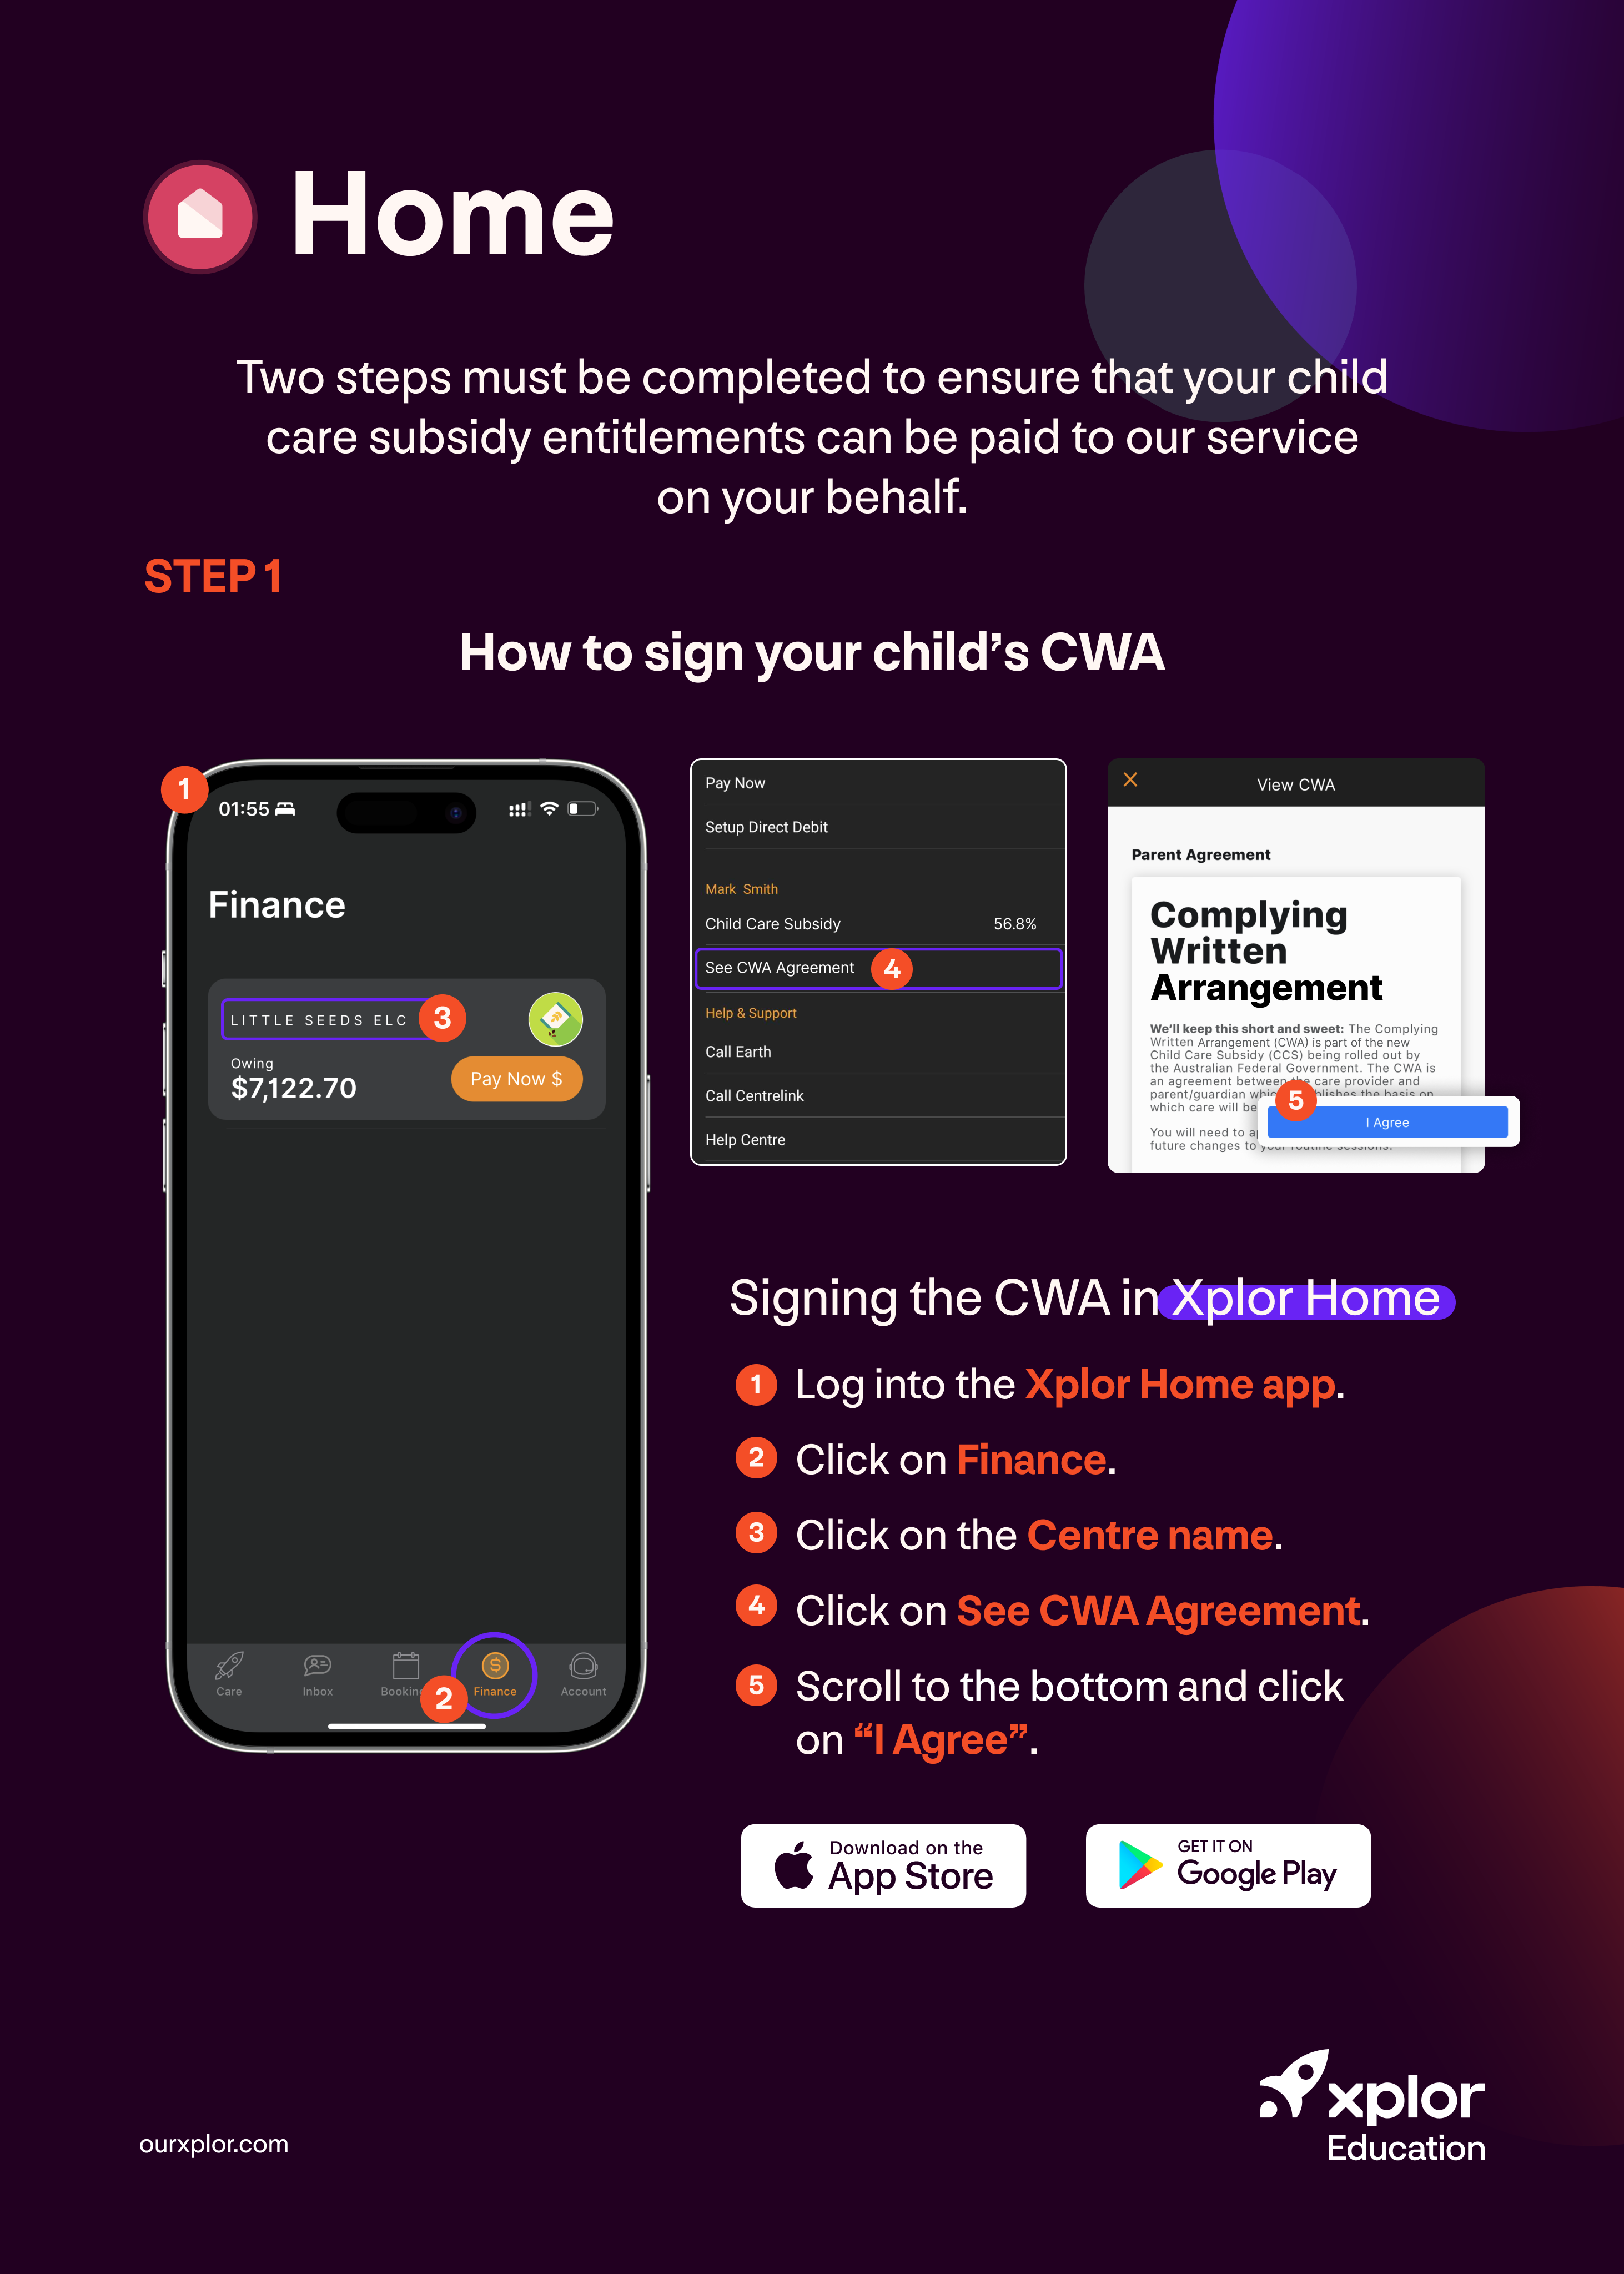 A poster with screenshots and steps outlining the process of signing a Complying Written Arrangement (CWA) in Xplor Education's Home app
